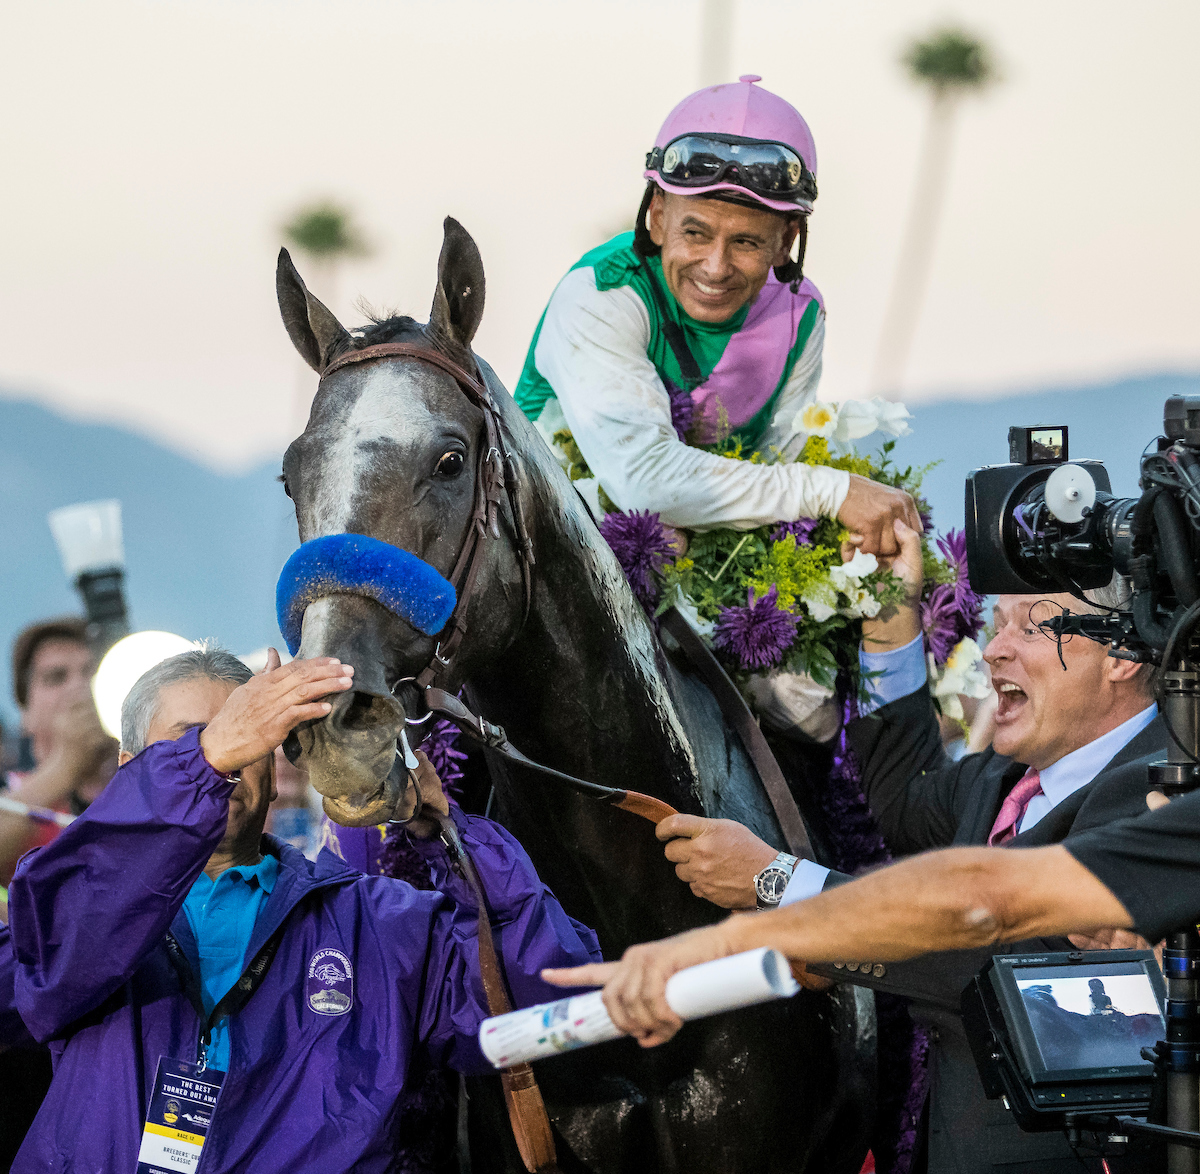 A moment to treasure: Mike Smith and Arrogate after the race. Photo: Alex Evers/Eclipse Sportswire/Breeders’ Cup